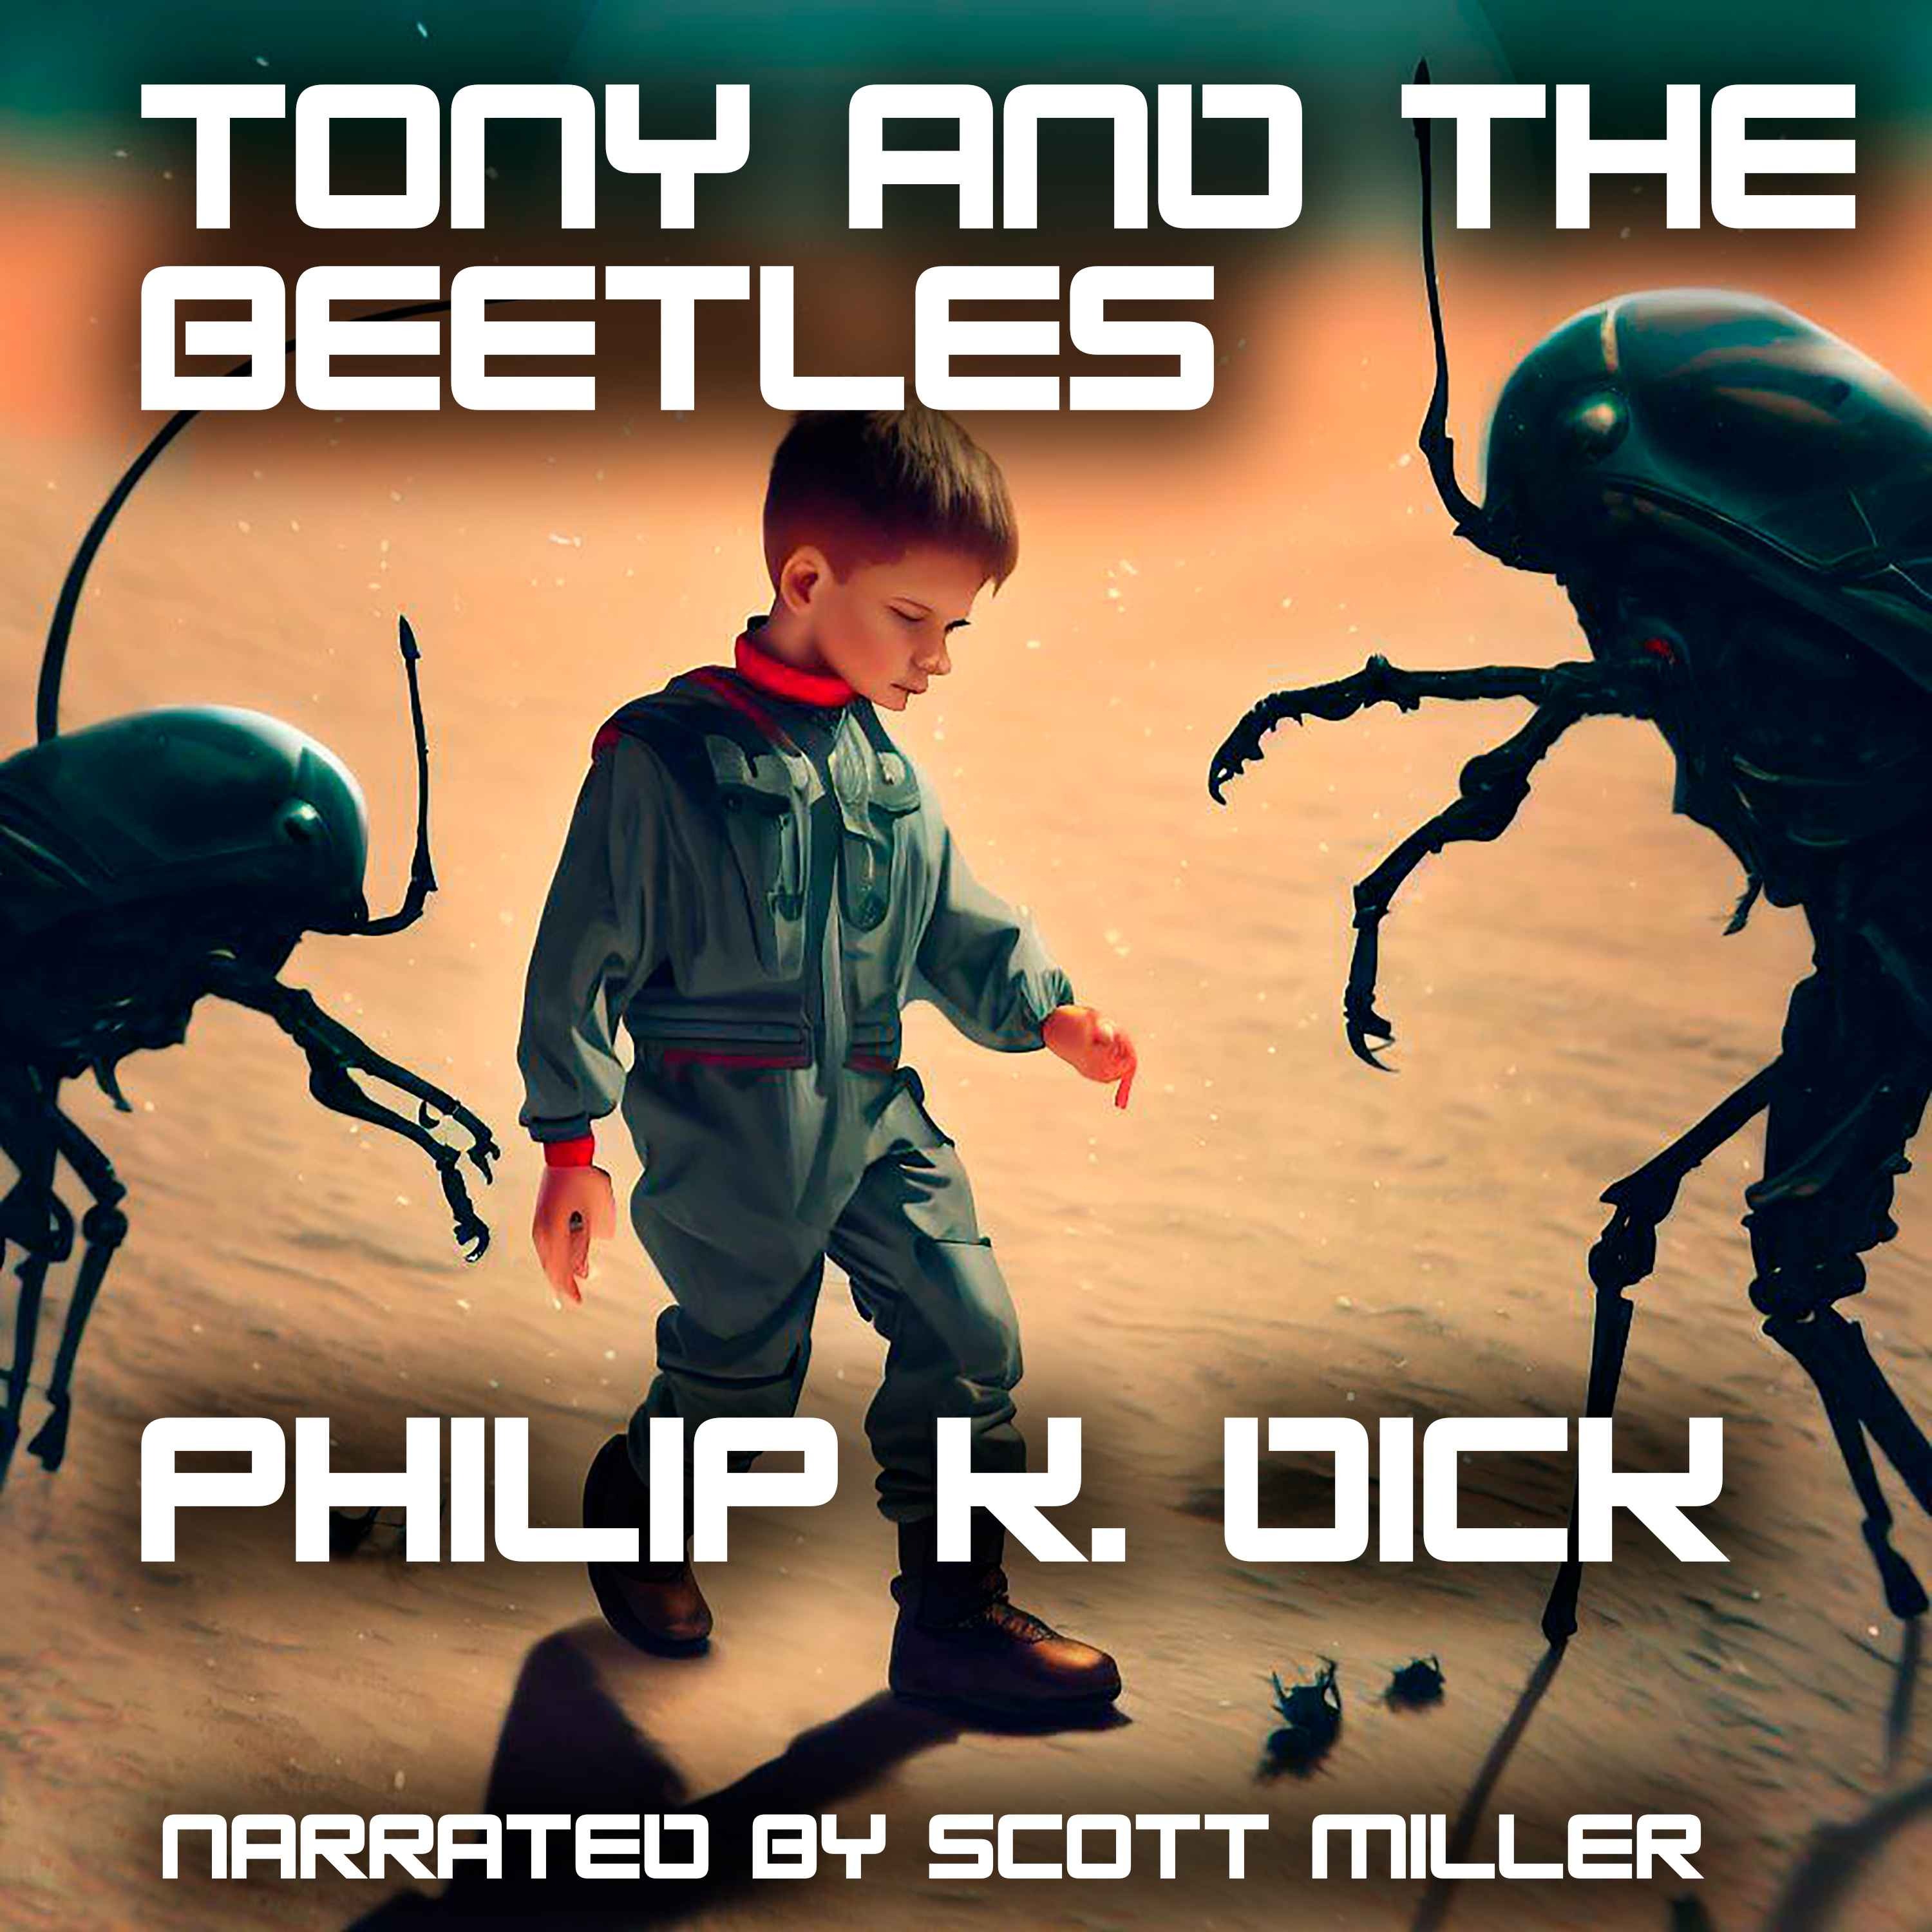 Tony and the Beetles by Philip K. Dick - Philip K. Dick Short Stories Audiobook